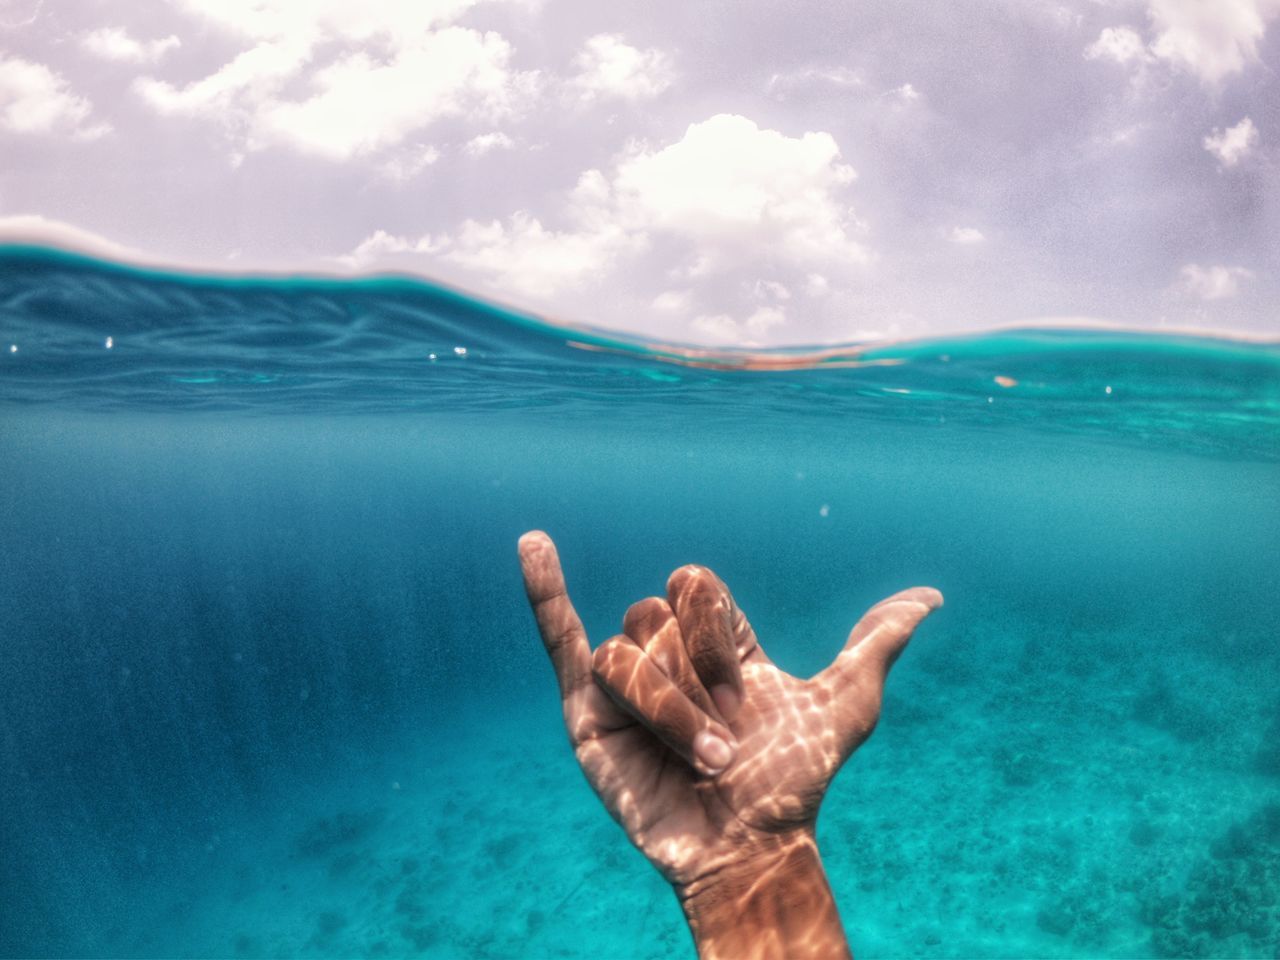 water, cloud - sky, sky, sea, human body part, human hand, nature, one person, hand, day, body part, beauty in nature, real people, unrecognizable person, finger, scenics - nature, human finger, lifestyles, outdoors, turquoise colored, human limb